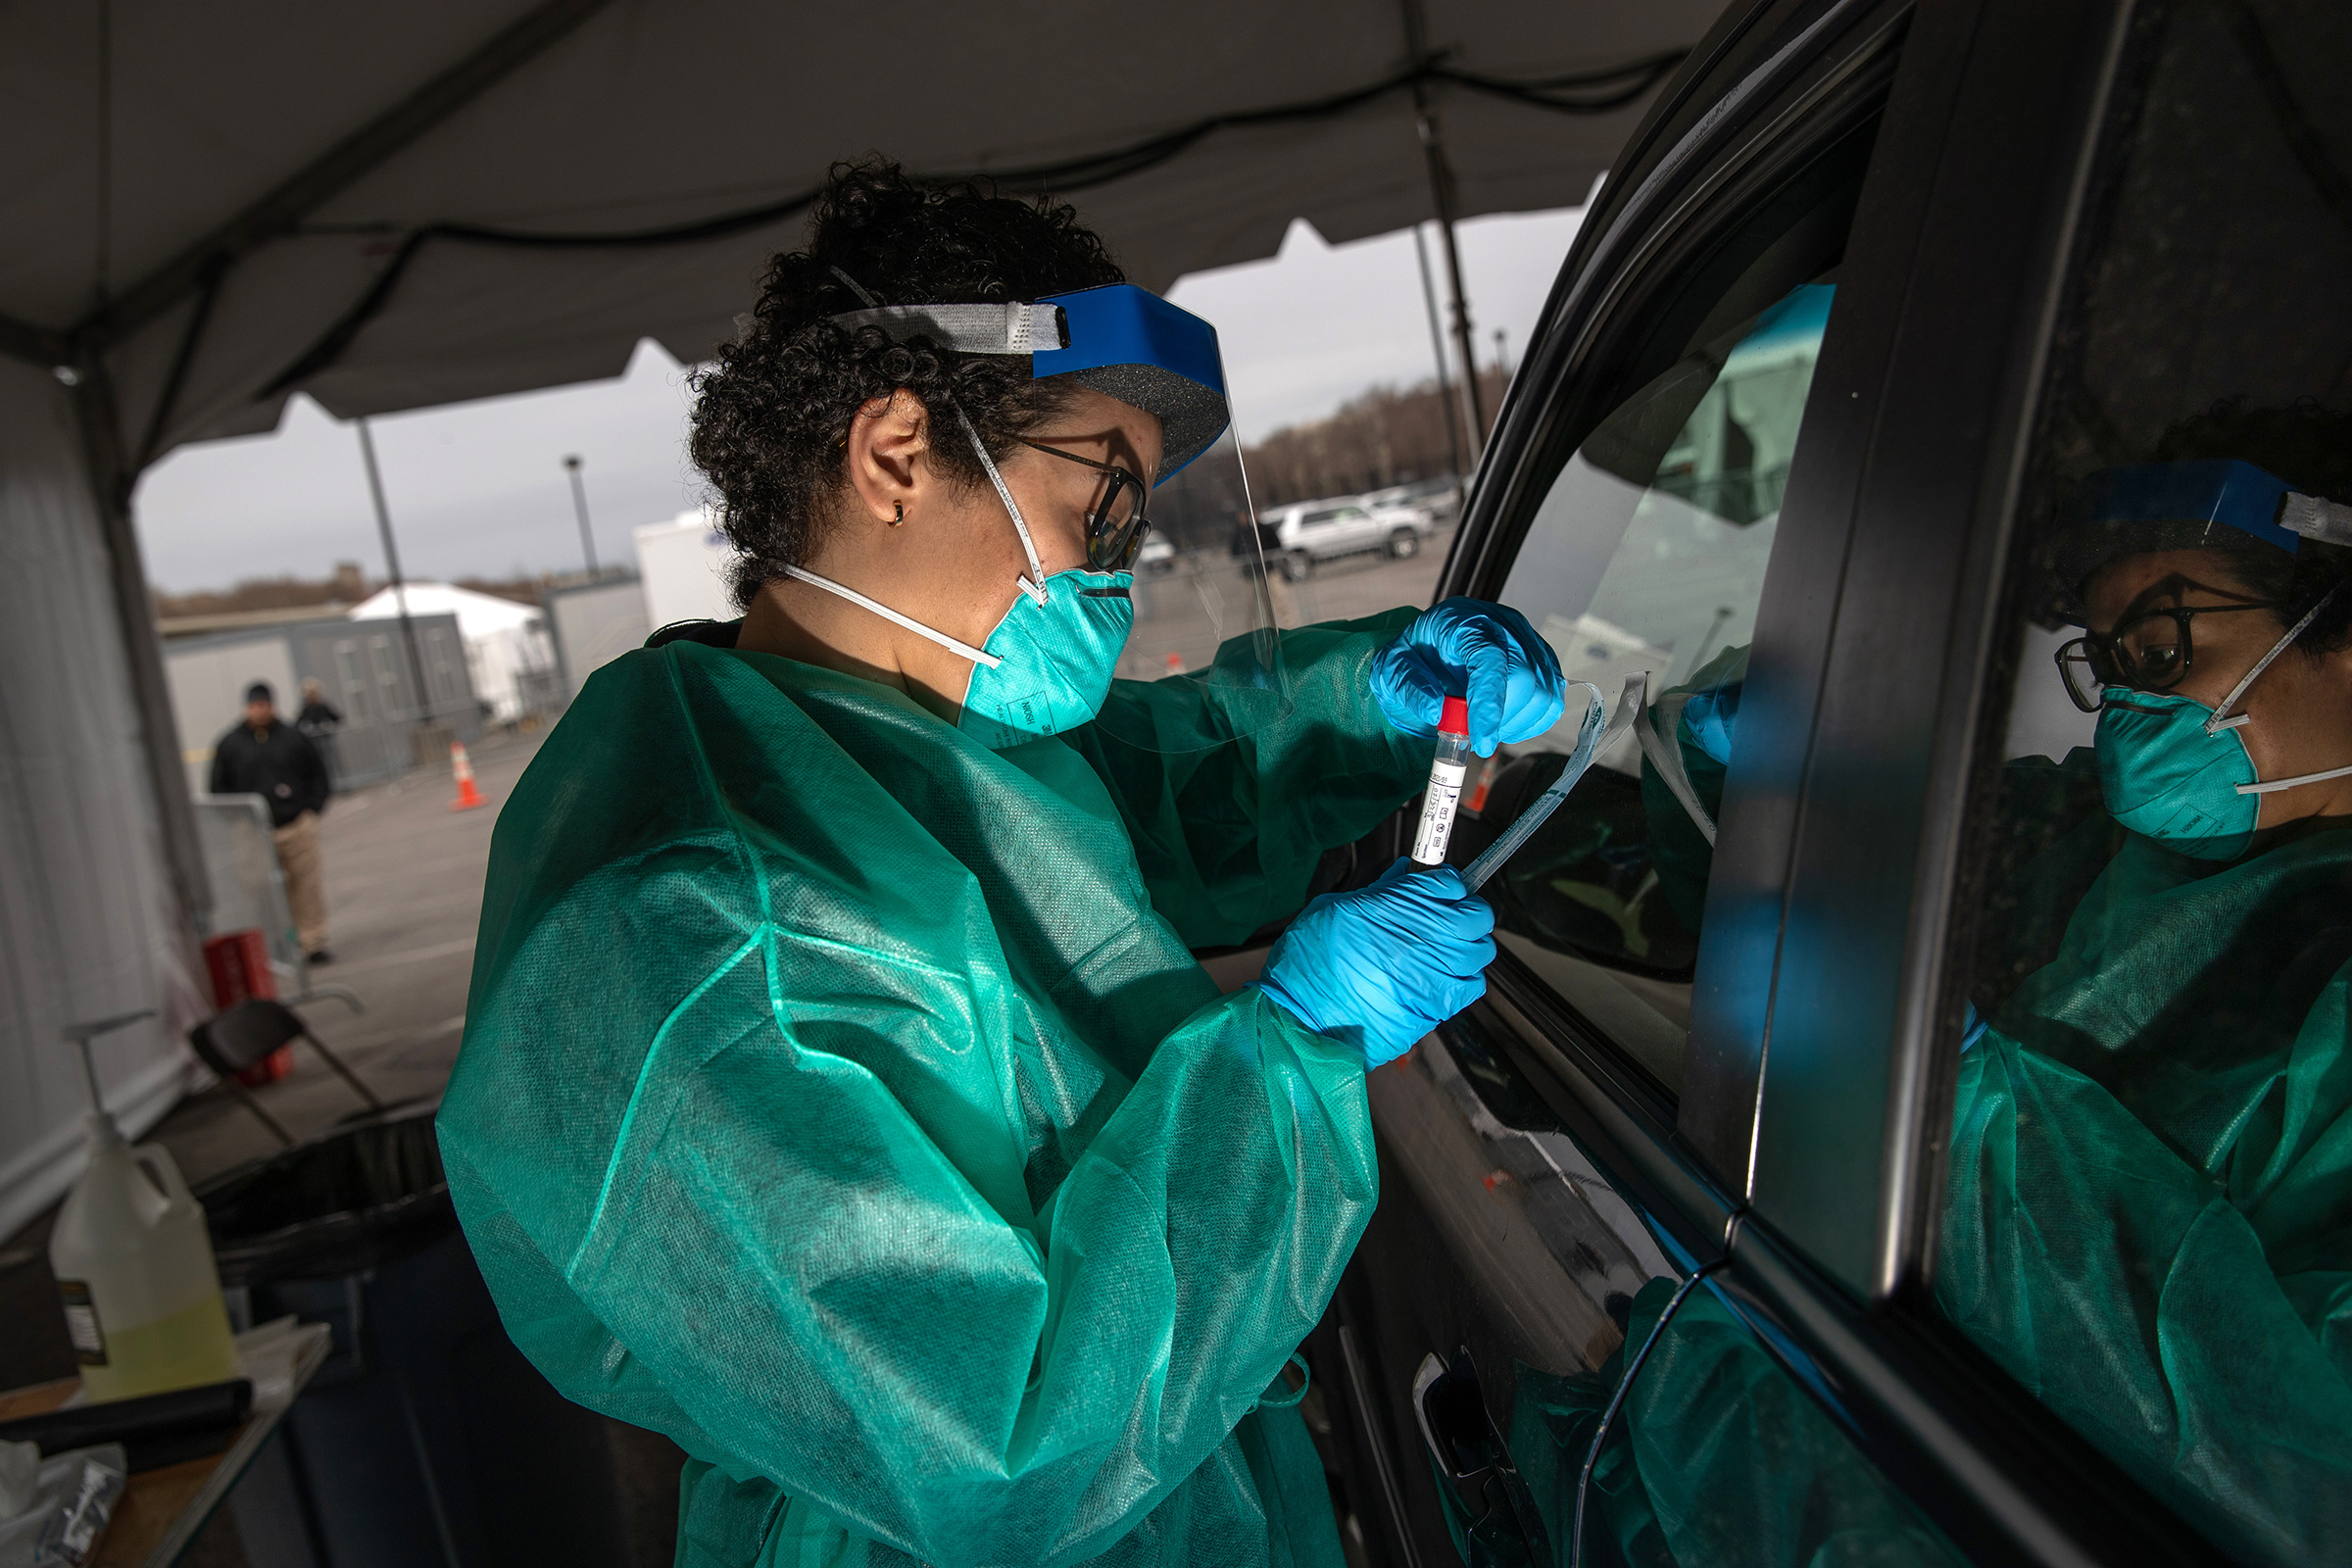 A health worker handles a coronavirus swab test at a drive-thru testing center for COVID-19 at Lehman College on in the Bronx, N.Y., March 28, 2020. (John Moore—Getty Images)